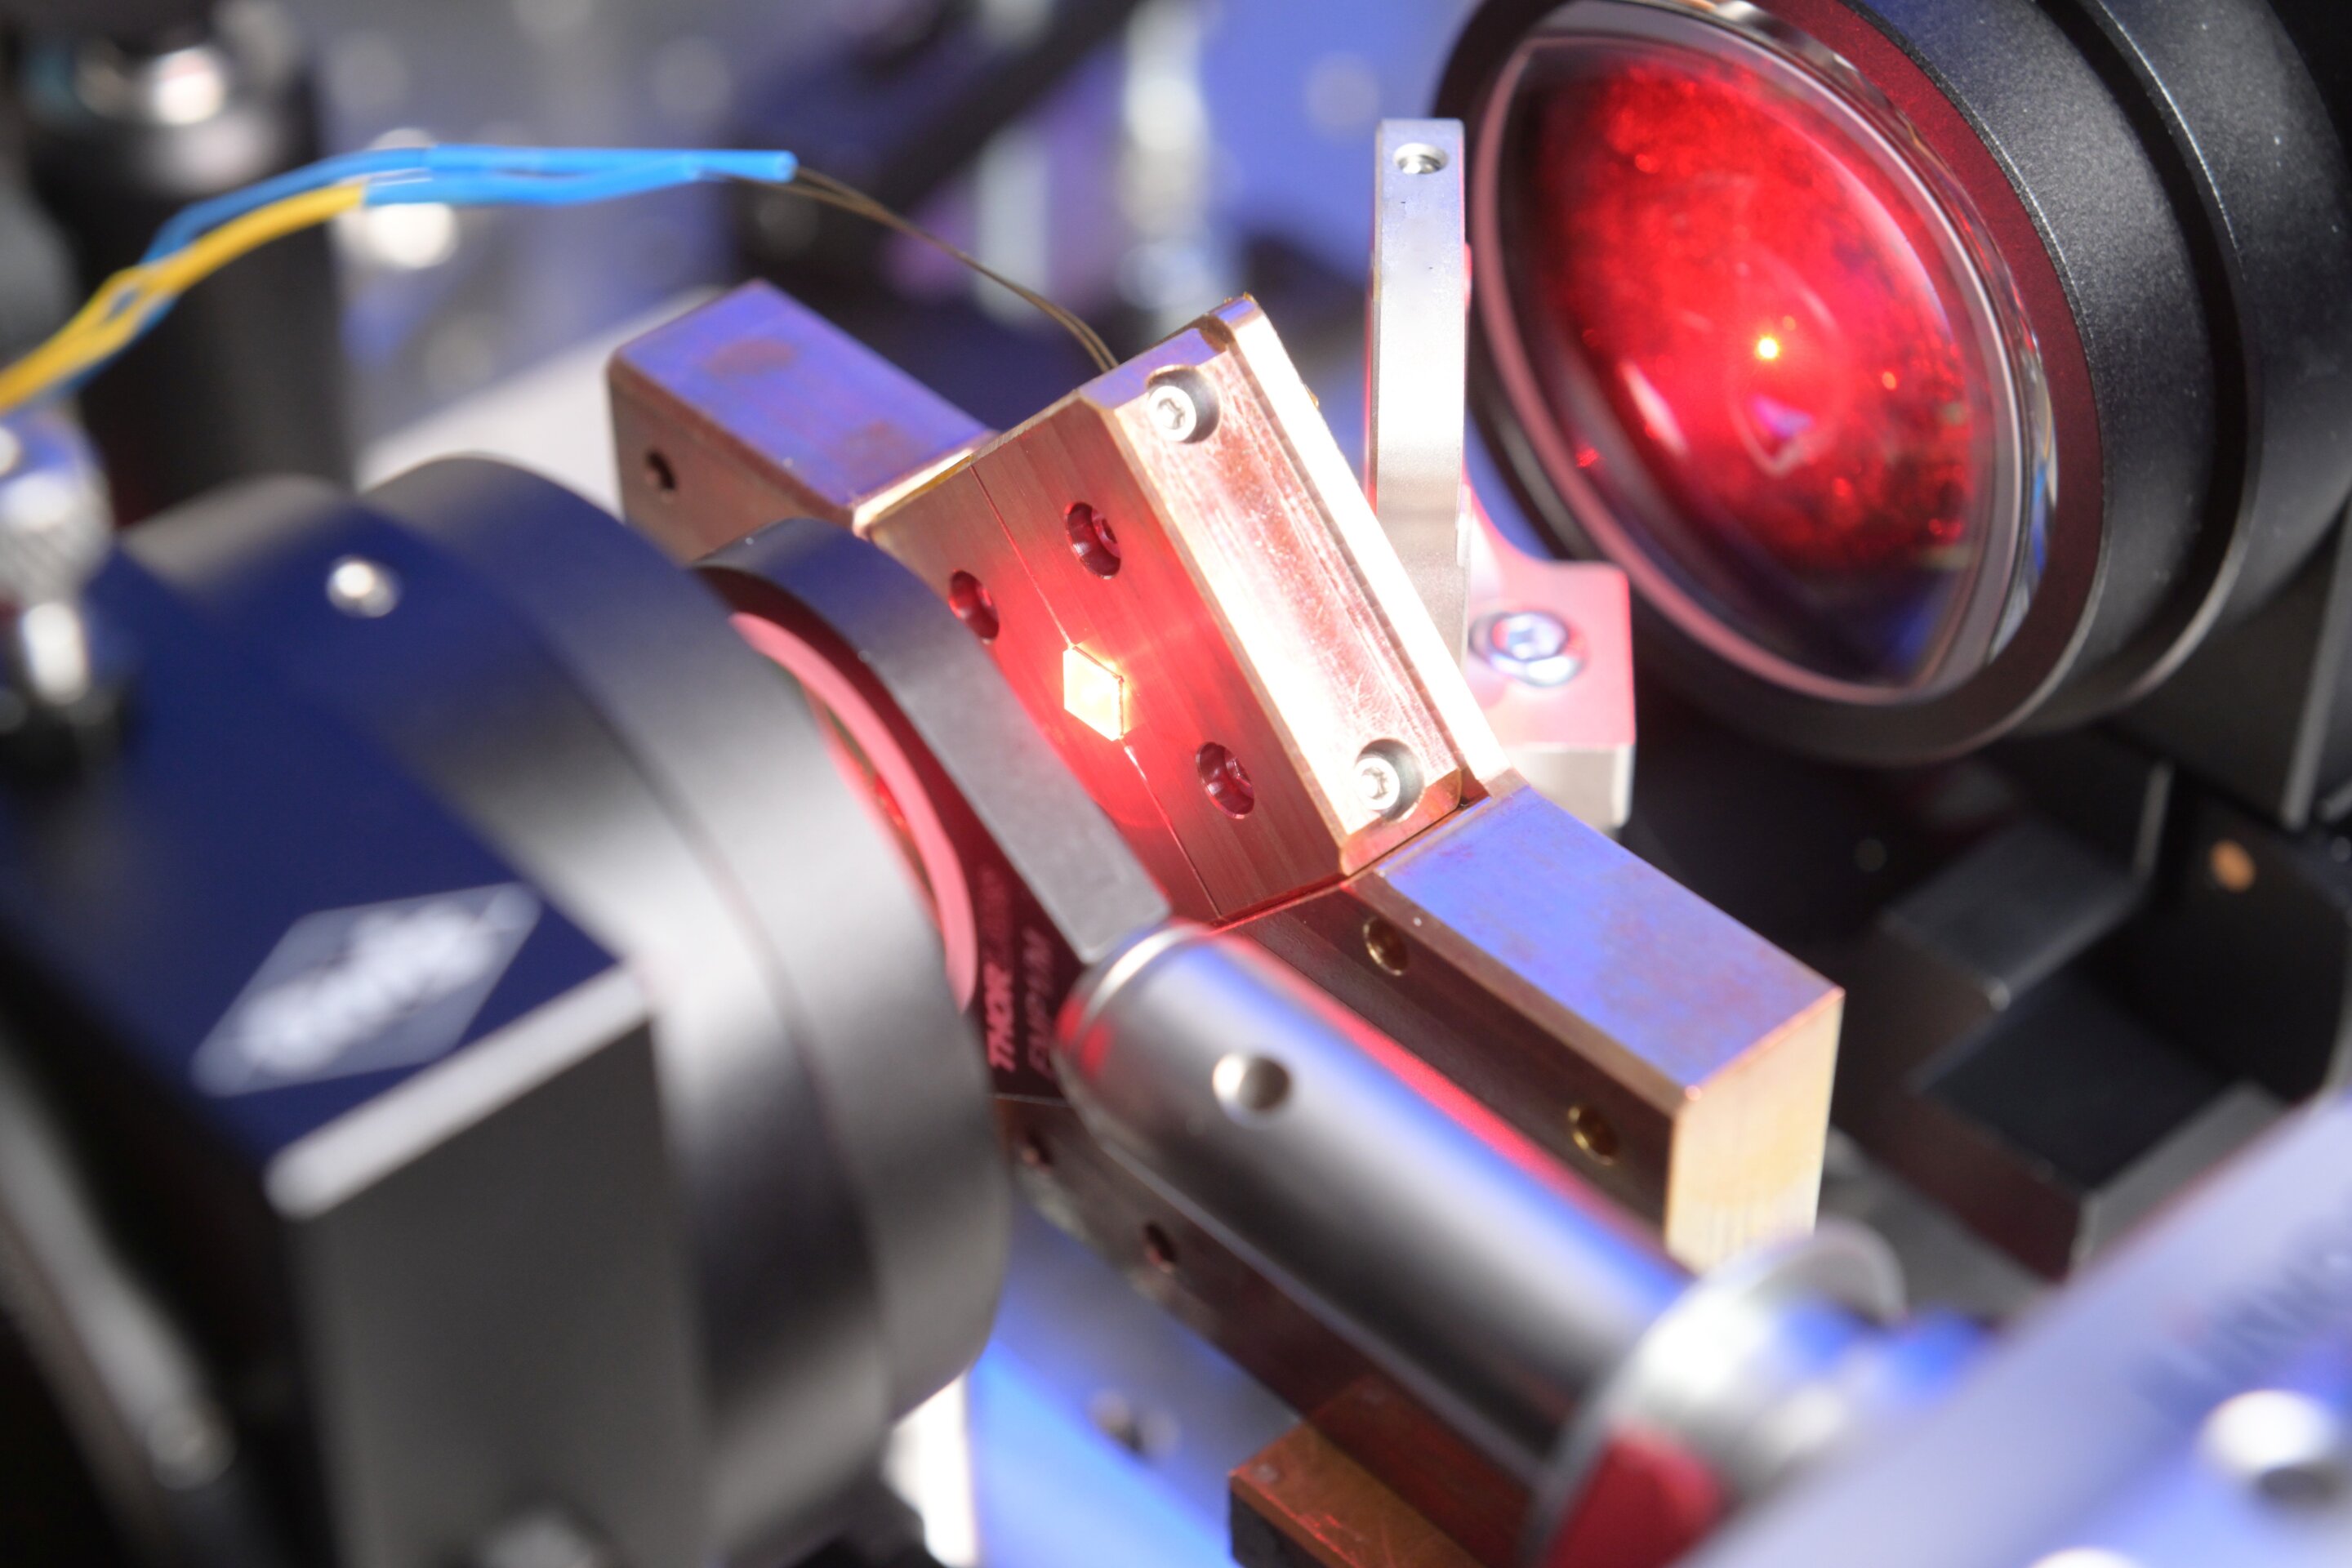 Alexandrite laser crystals found to be well suited for space applications